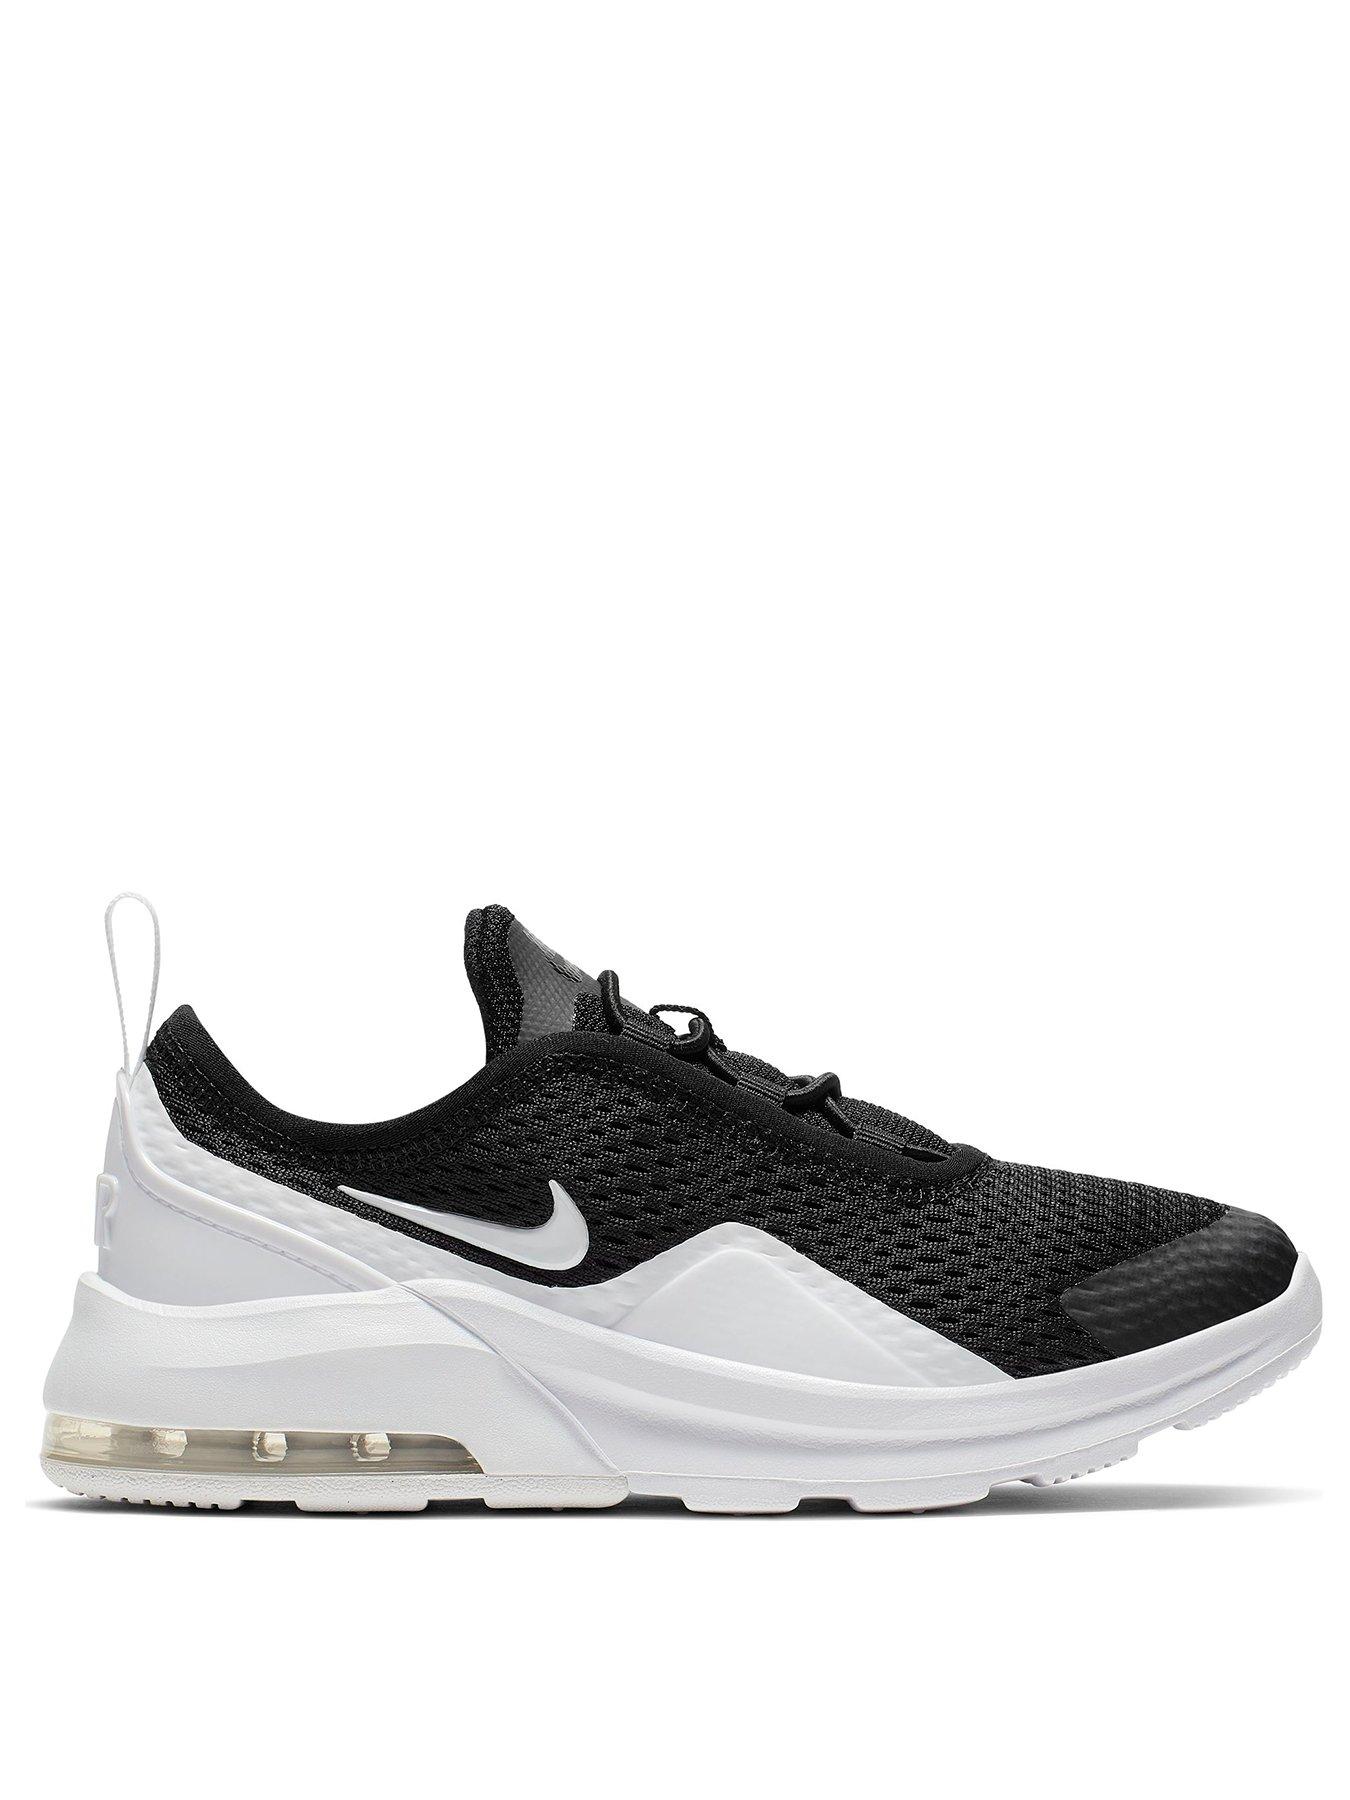 nike air max trainers black and white